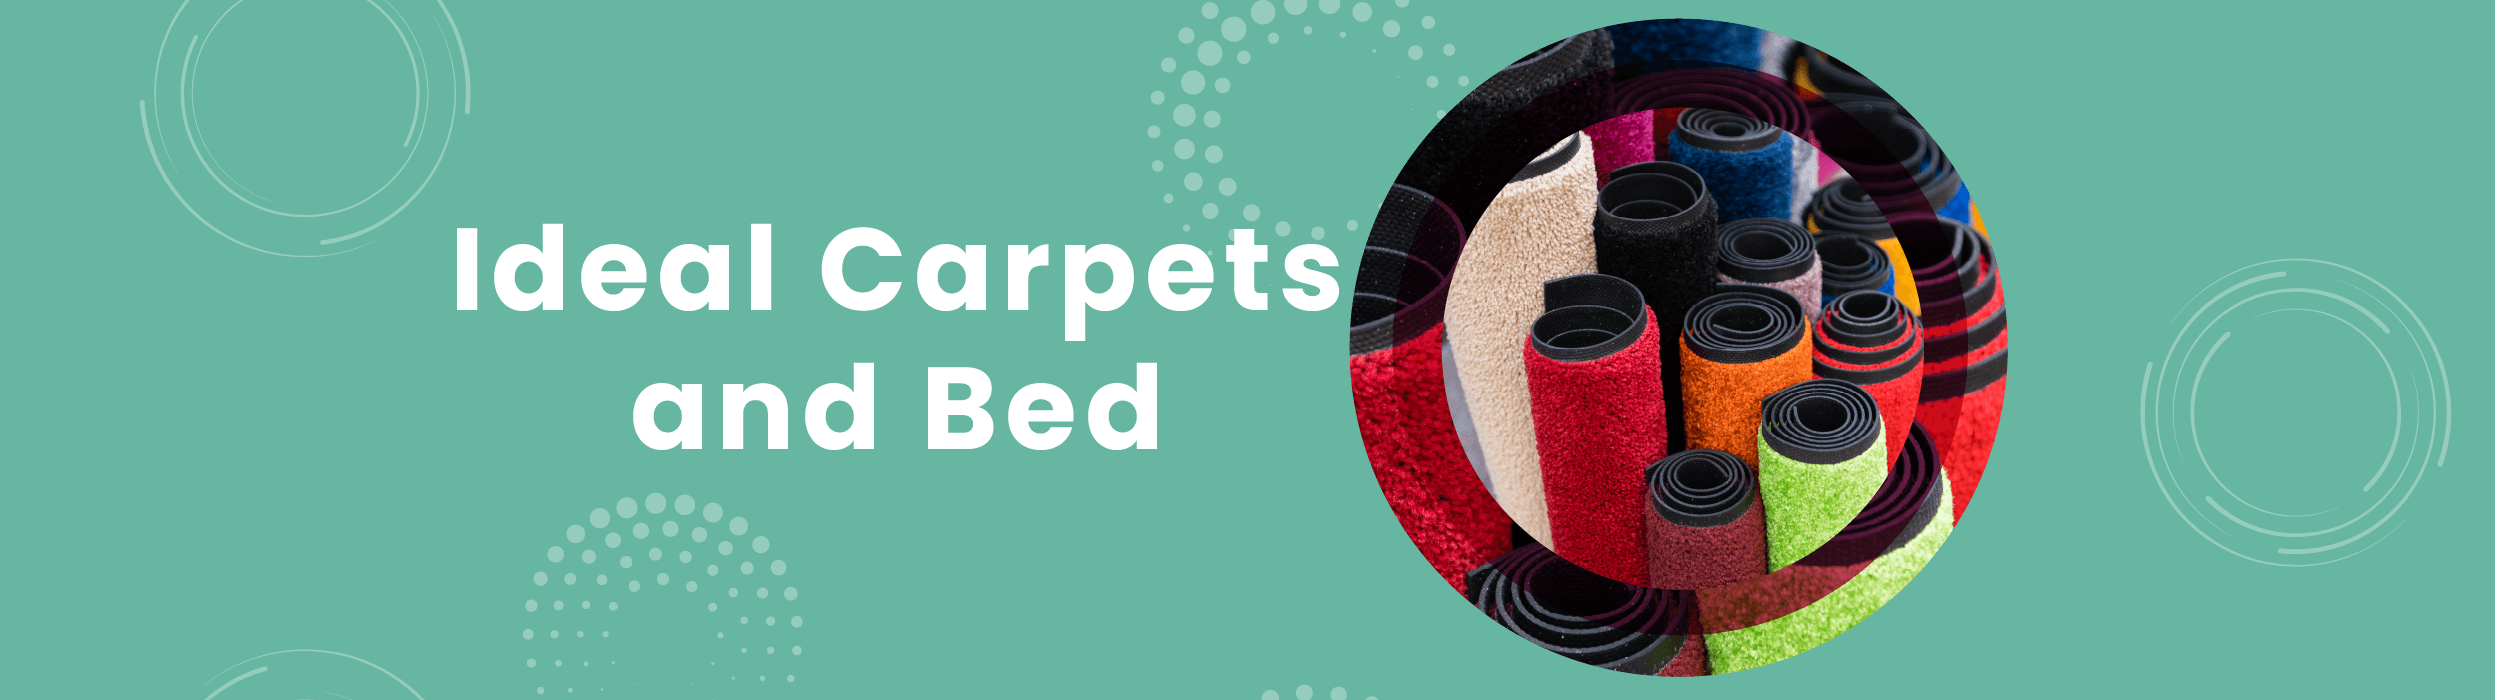 ideal-carpets-and-beds